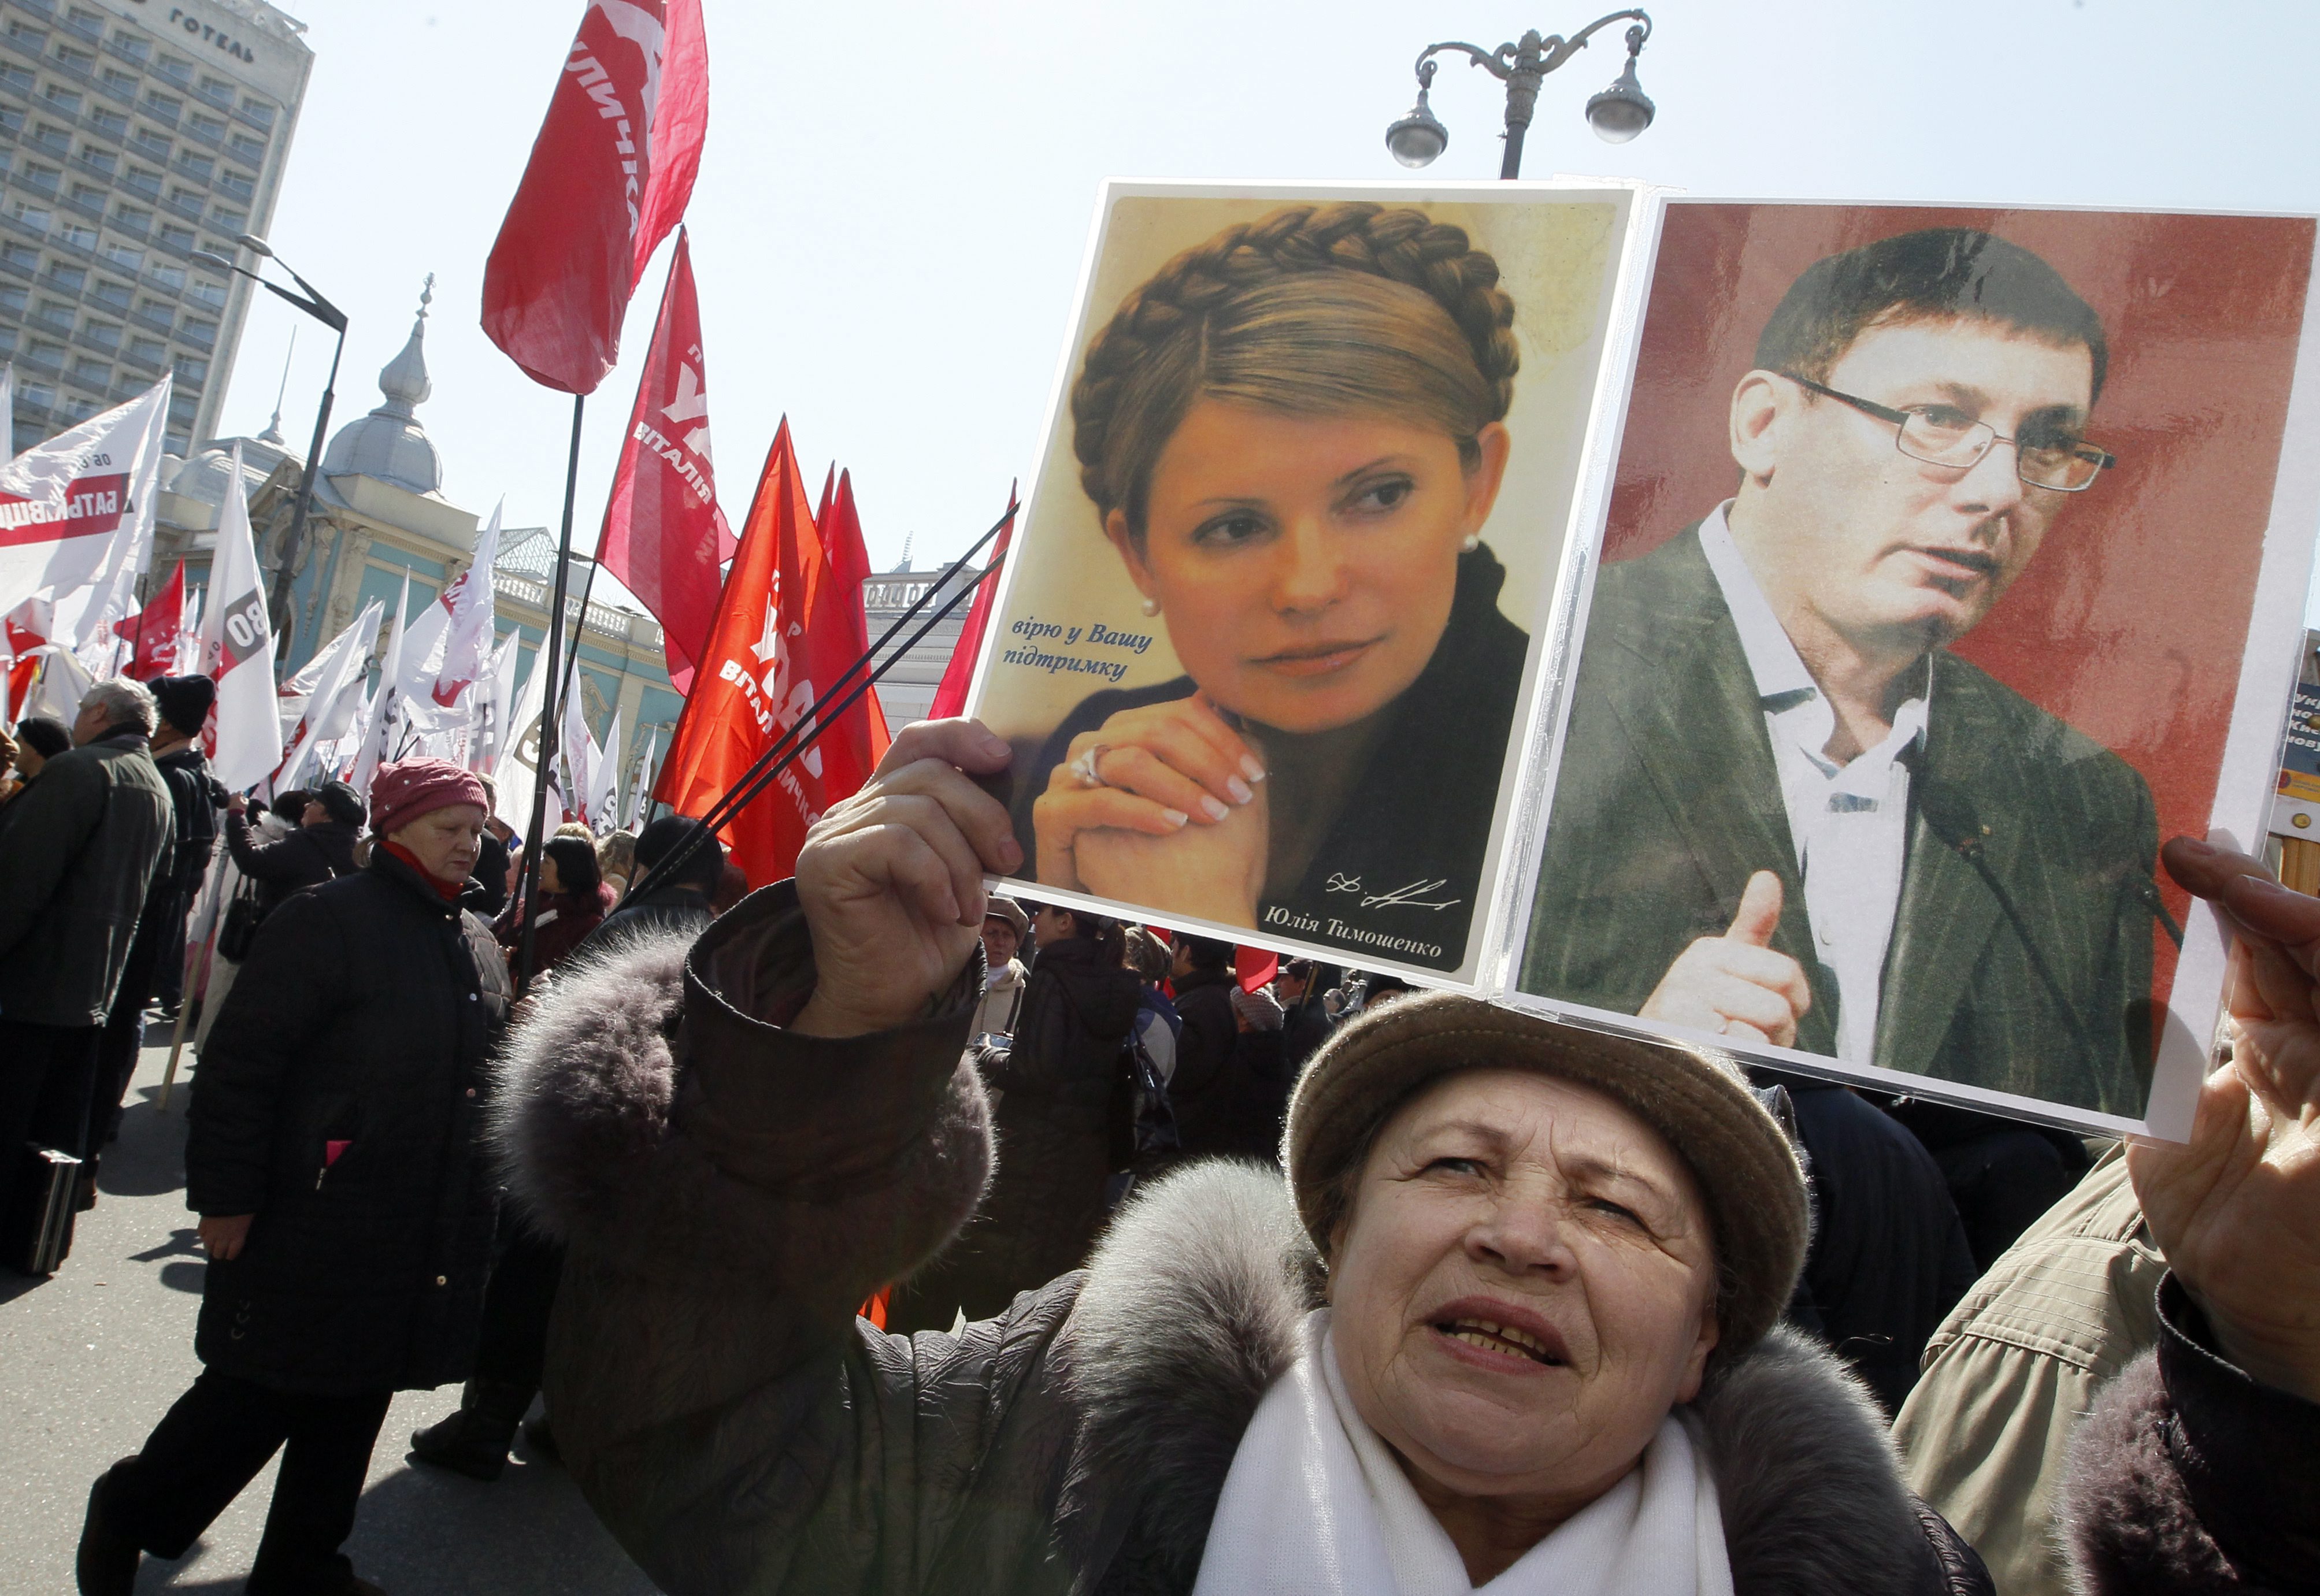 A Ukrainian opposition supporter waves portraits of their jailed leaders Yulia Tymoshenko (top left) and Yuriy Lutsenko during a rally near Parliament in Kiev. Photo: EPA